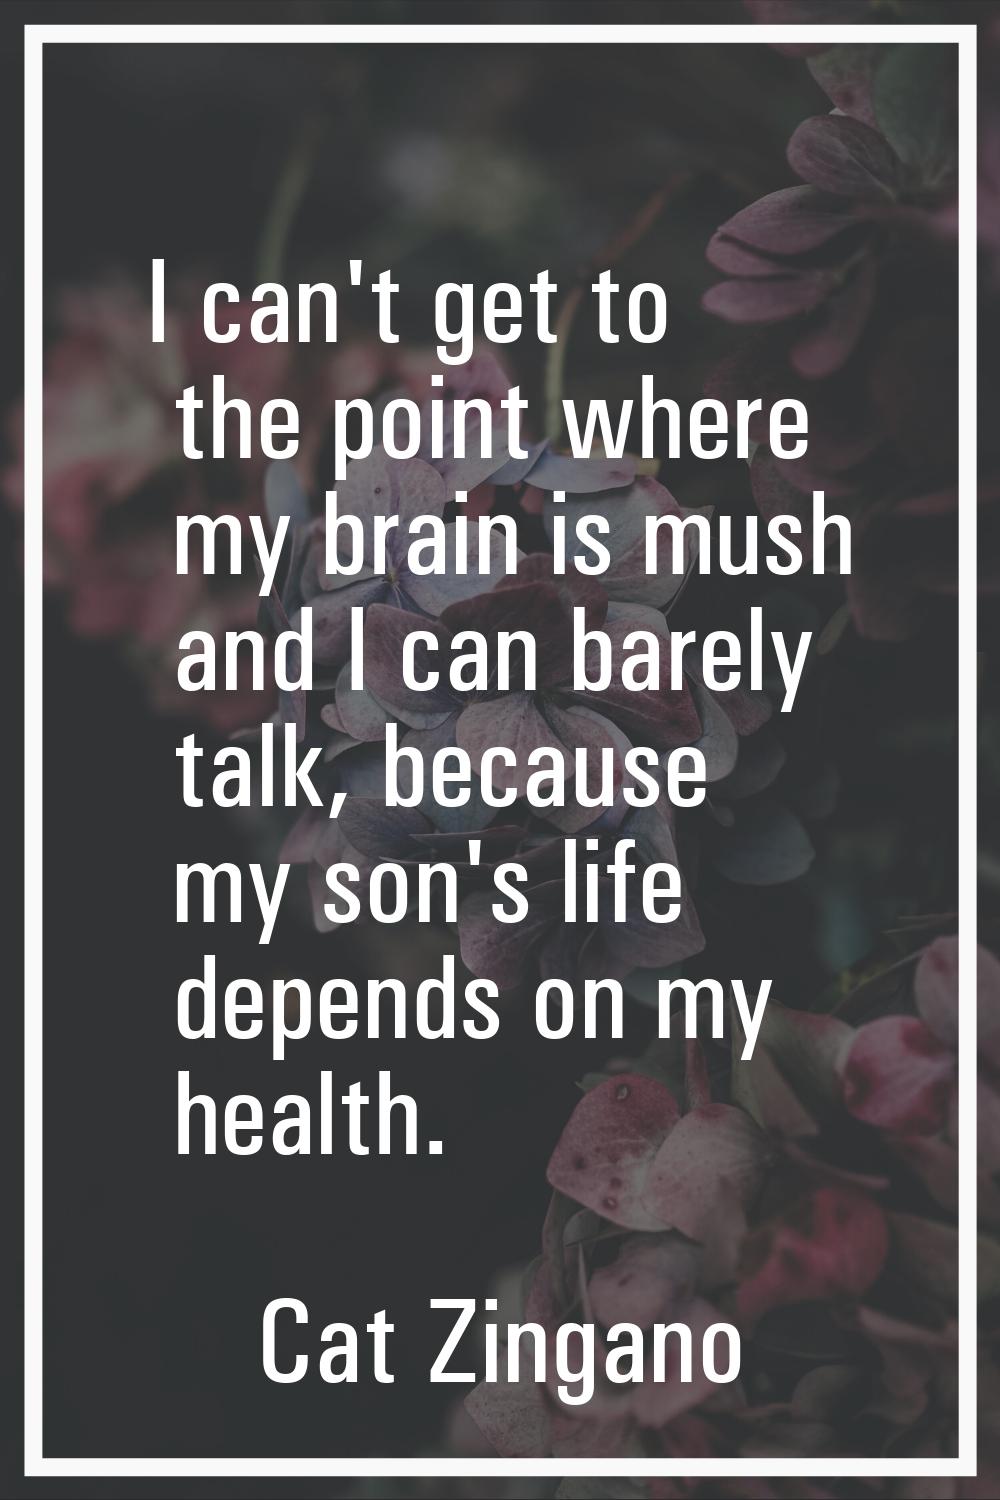 I can't get to the point where my brain is mush and I can barely talk, because my son's life depend